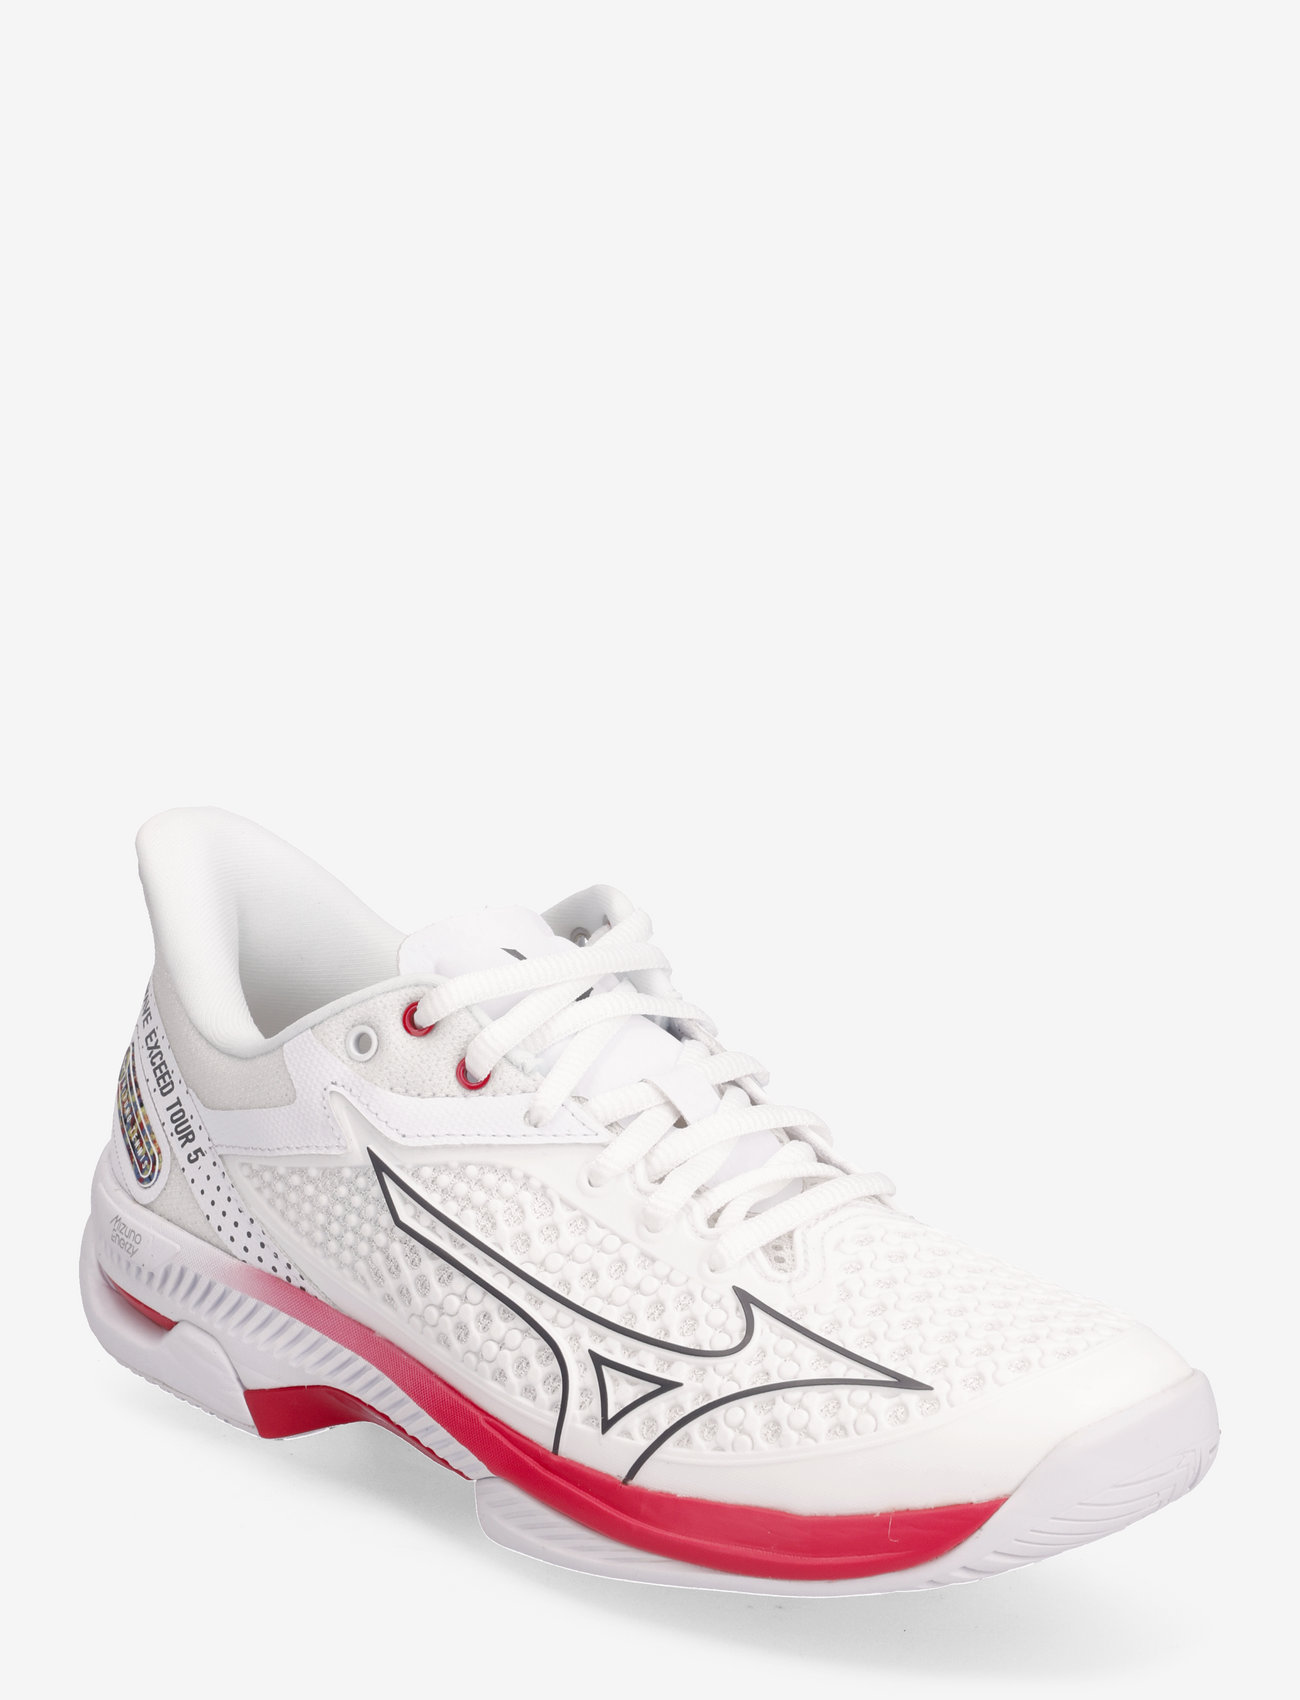 Mizuno - WAVE EXCEED TOUR 5AC(W) - racketsports shoes - undyed white/quiet shade/opera red - 0